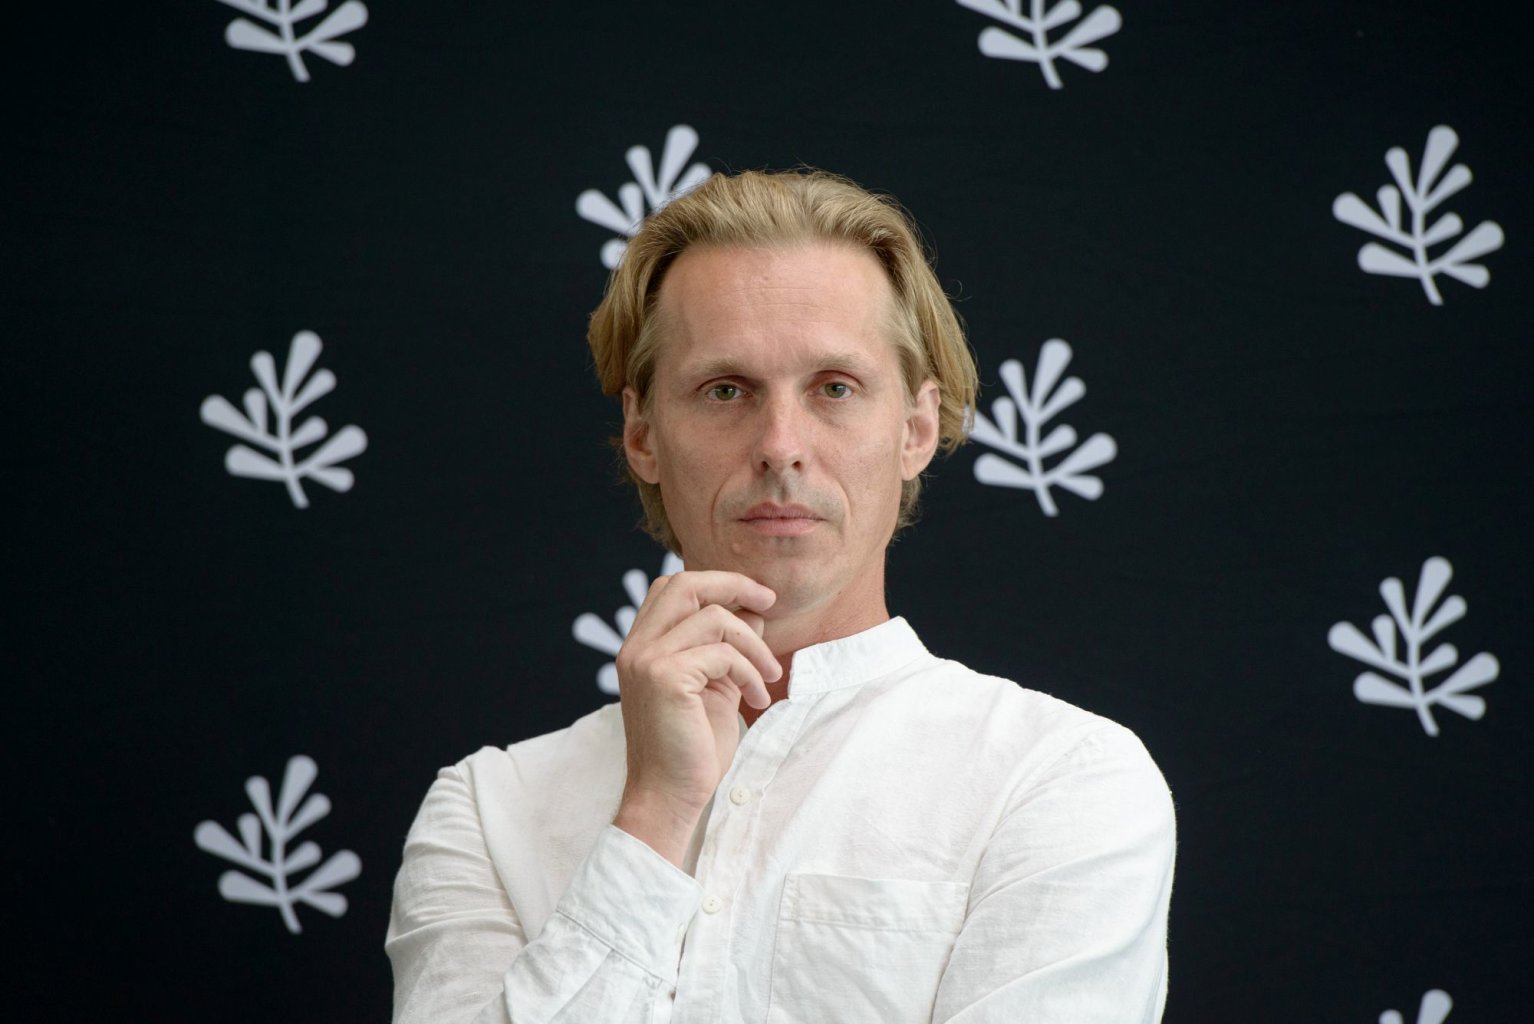 Martynas Rimeikis, the new artistic director of the Lithuanian National Ballet